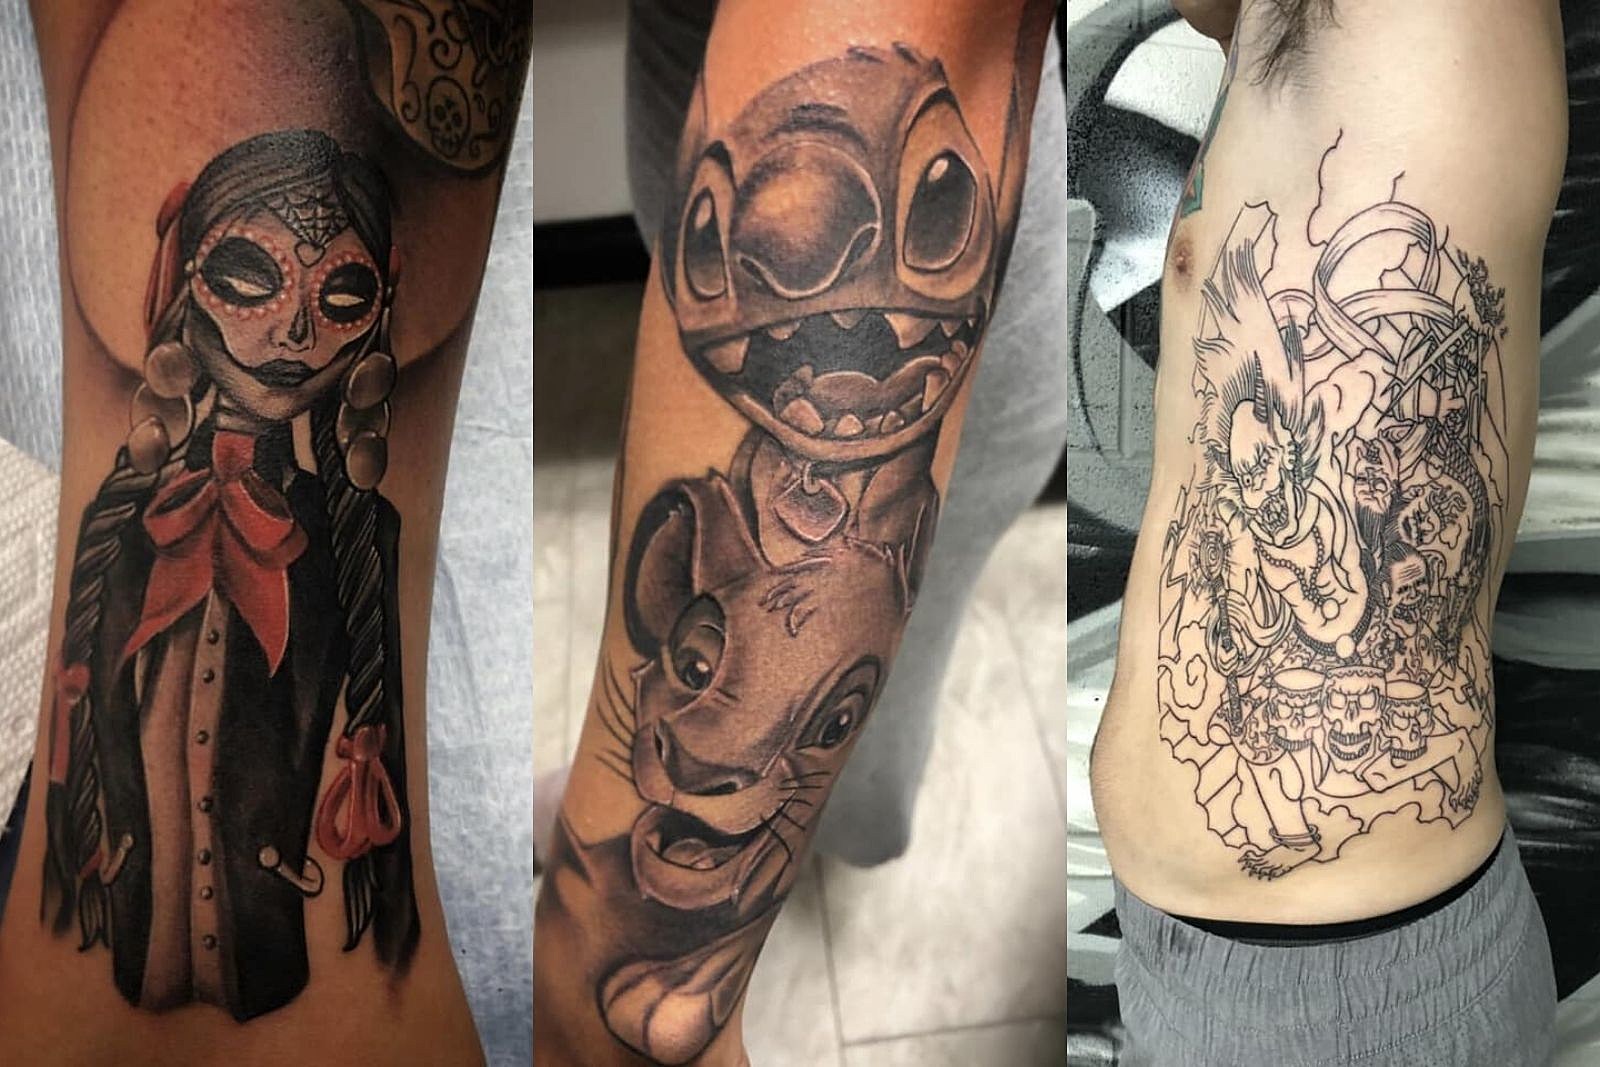 30 Overly Requested Tattoo Designs That Tattoo Artists Are Sick And Tired  Of  Bored Panda